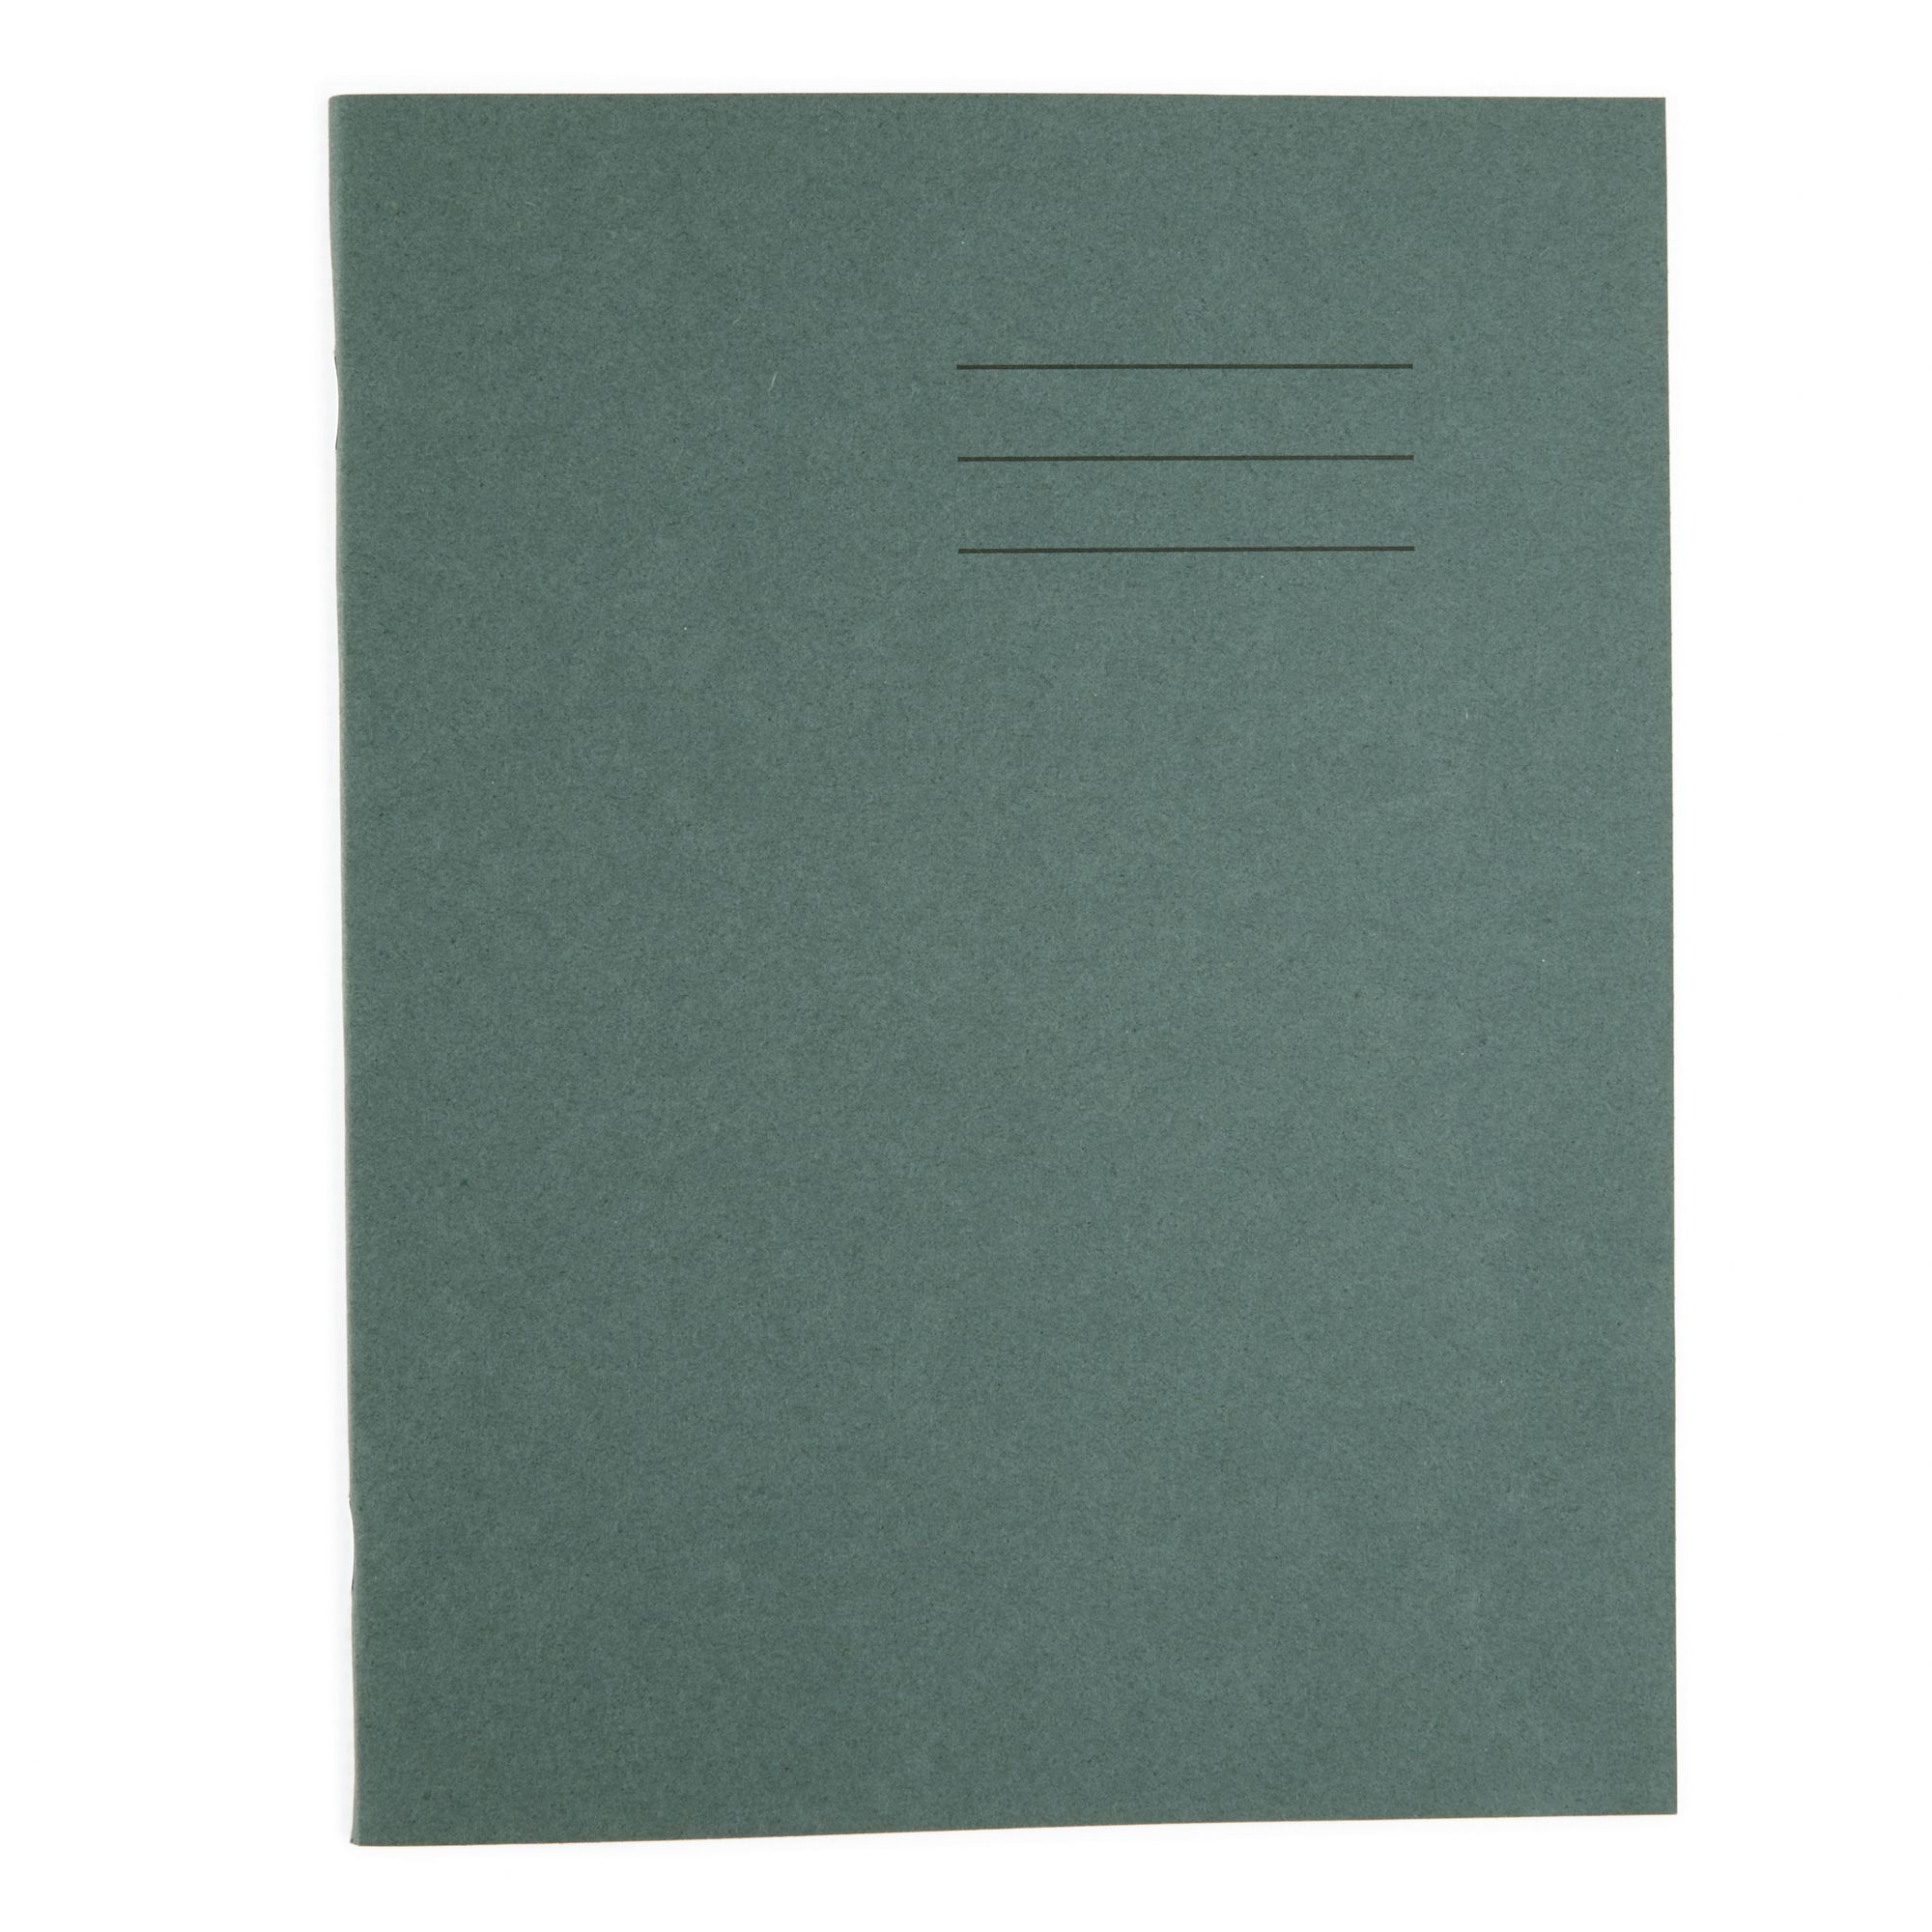 8x6.5 Exercise Book 48 Page, 8mm Ruled with Margin, Dark Green - Pack of 100